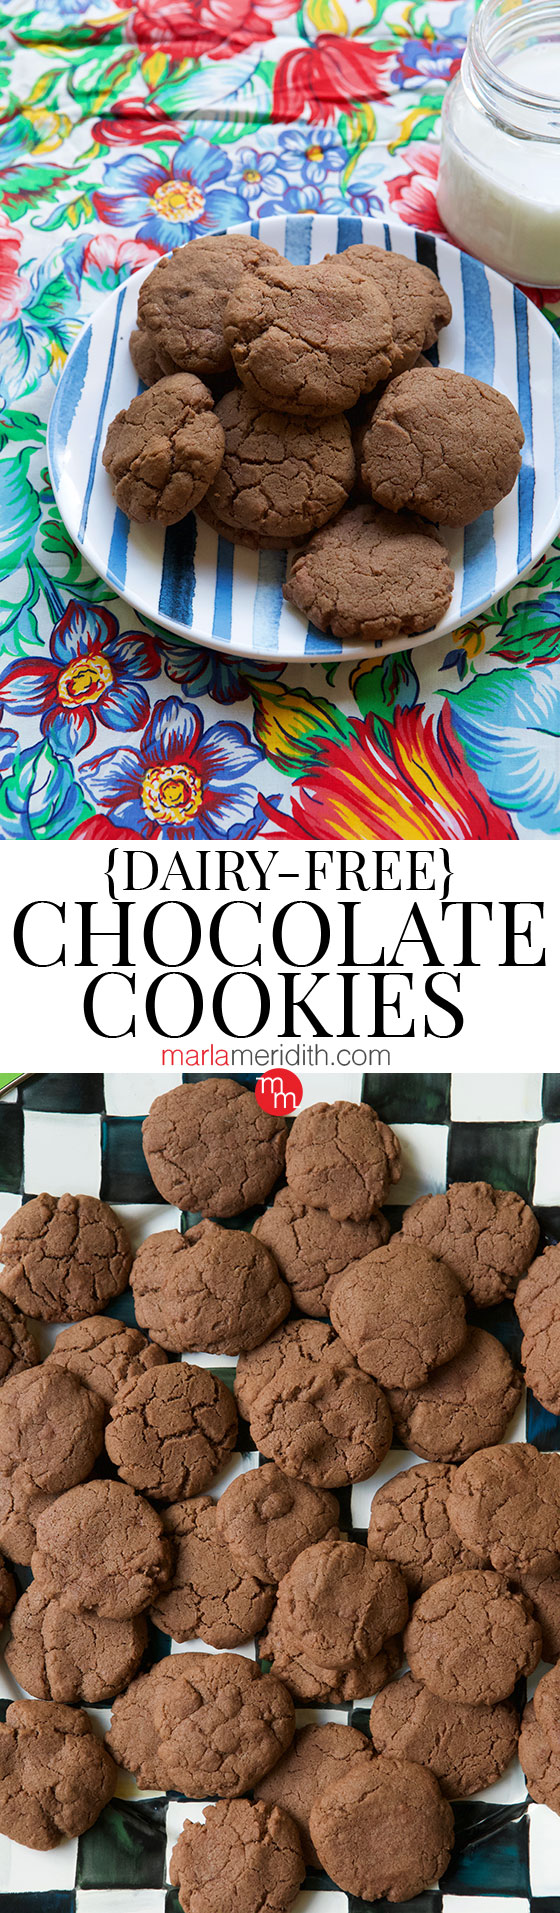 You've gotta try these Dairy-Free Chocolate Cookies., so delish! Get the recipe on marlameridith.com